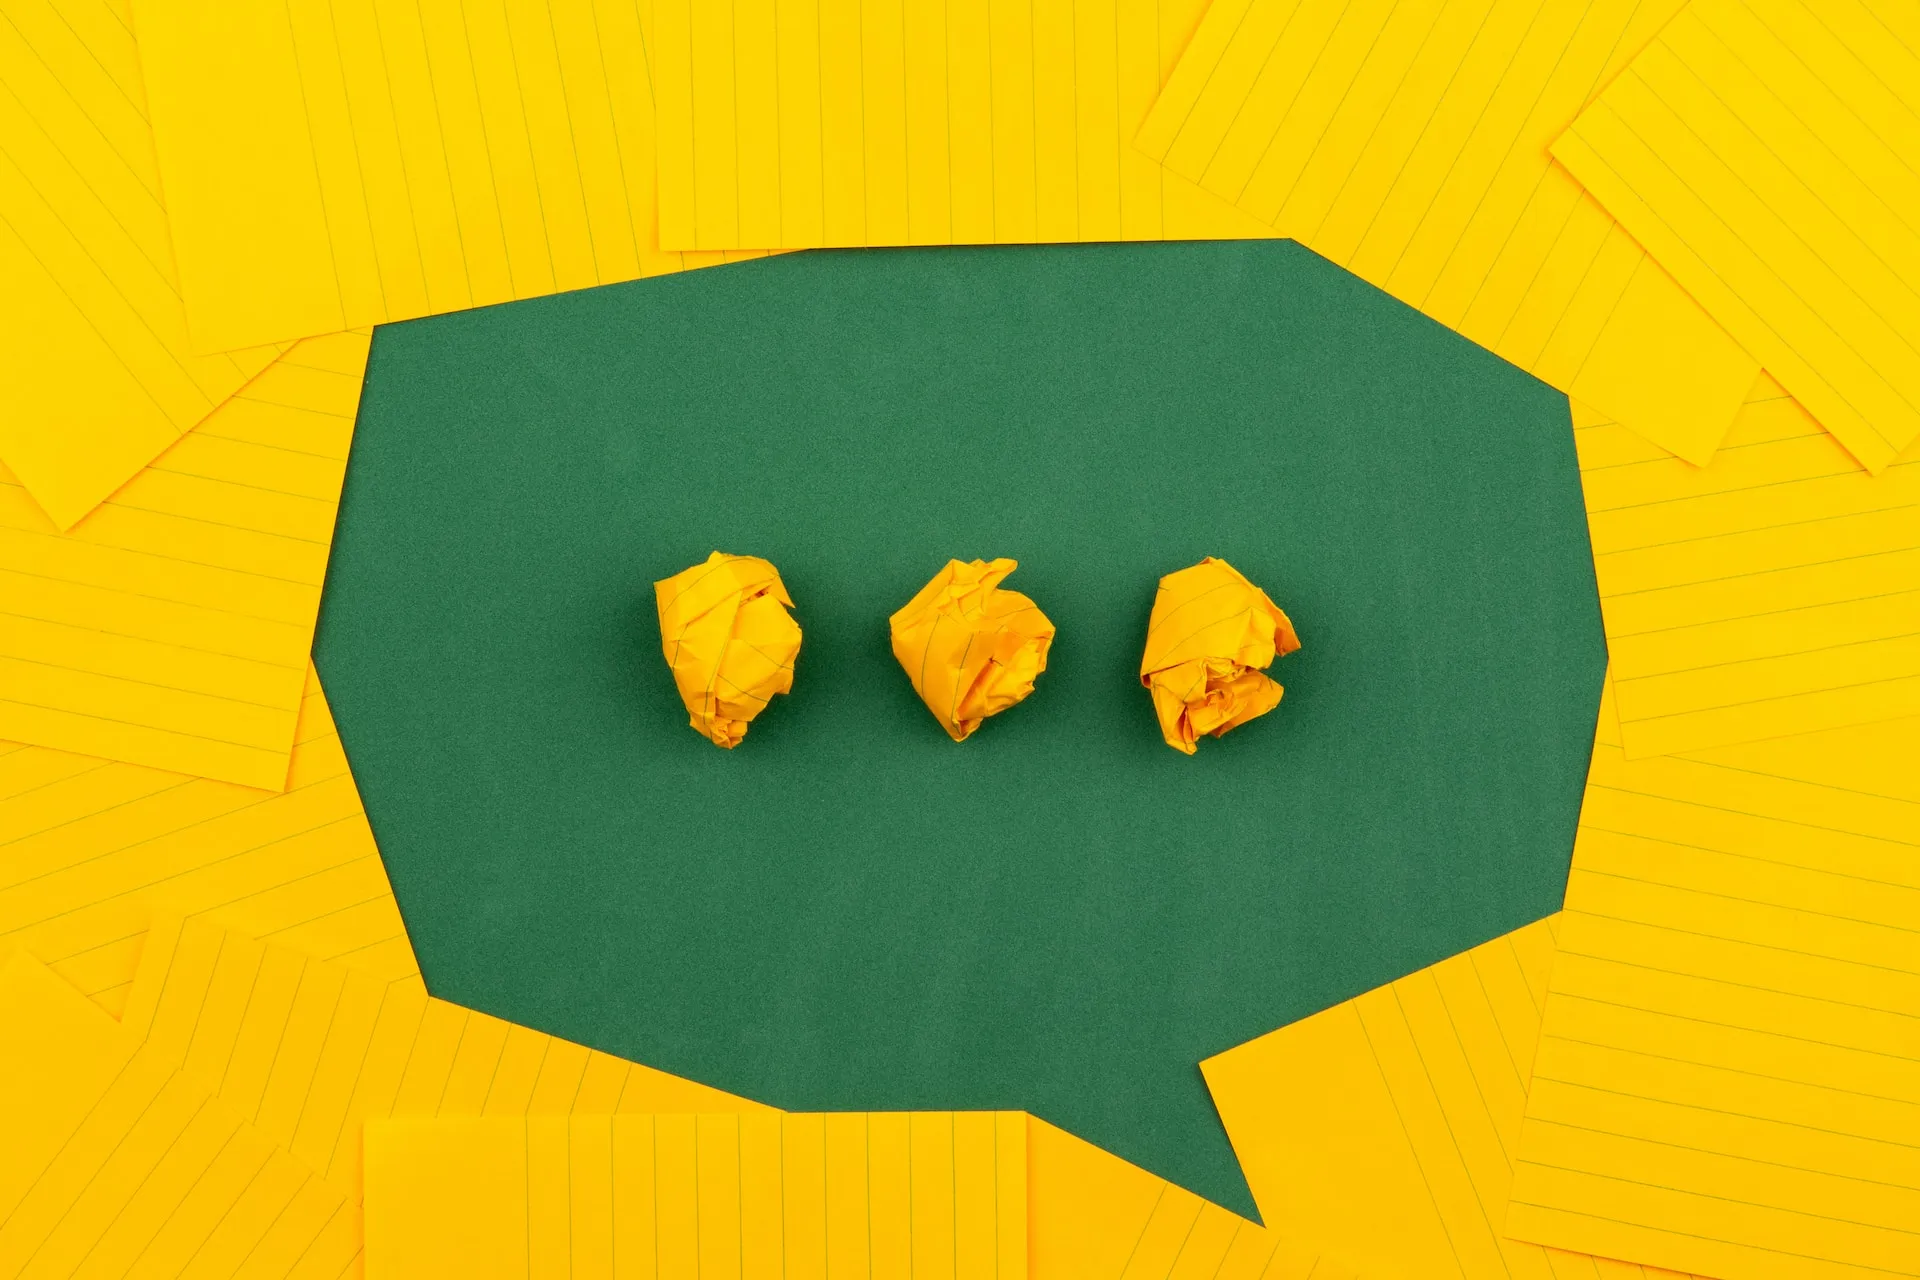 Speech bubble, the role of marketing teams collecting customer feedback